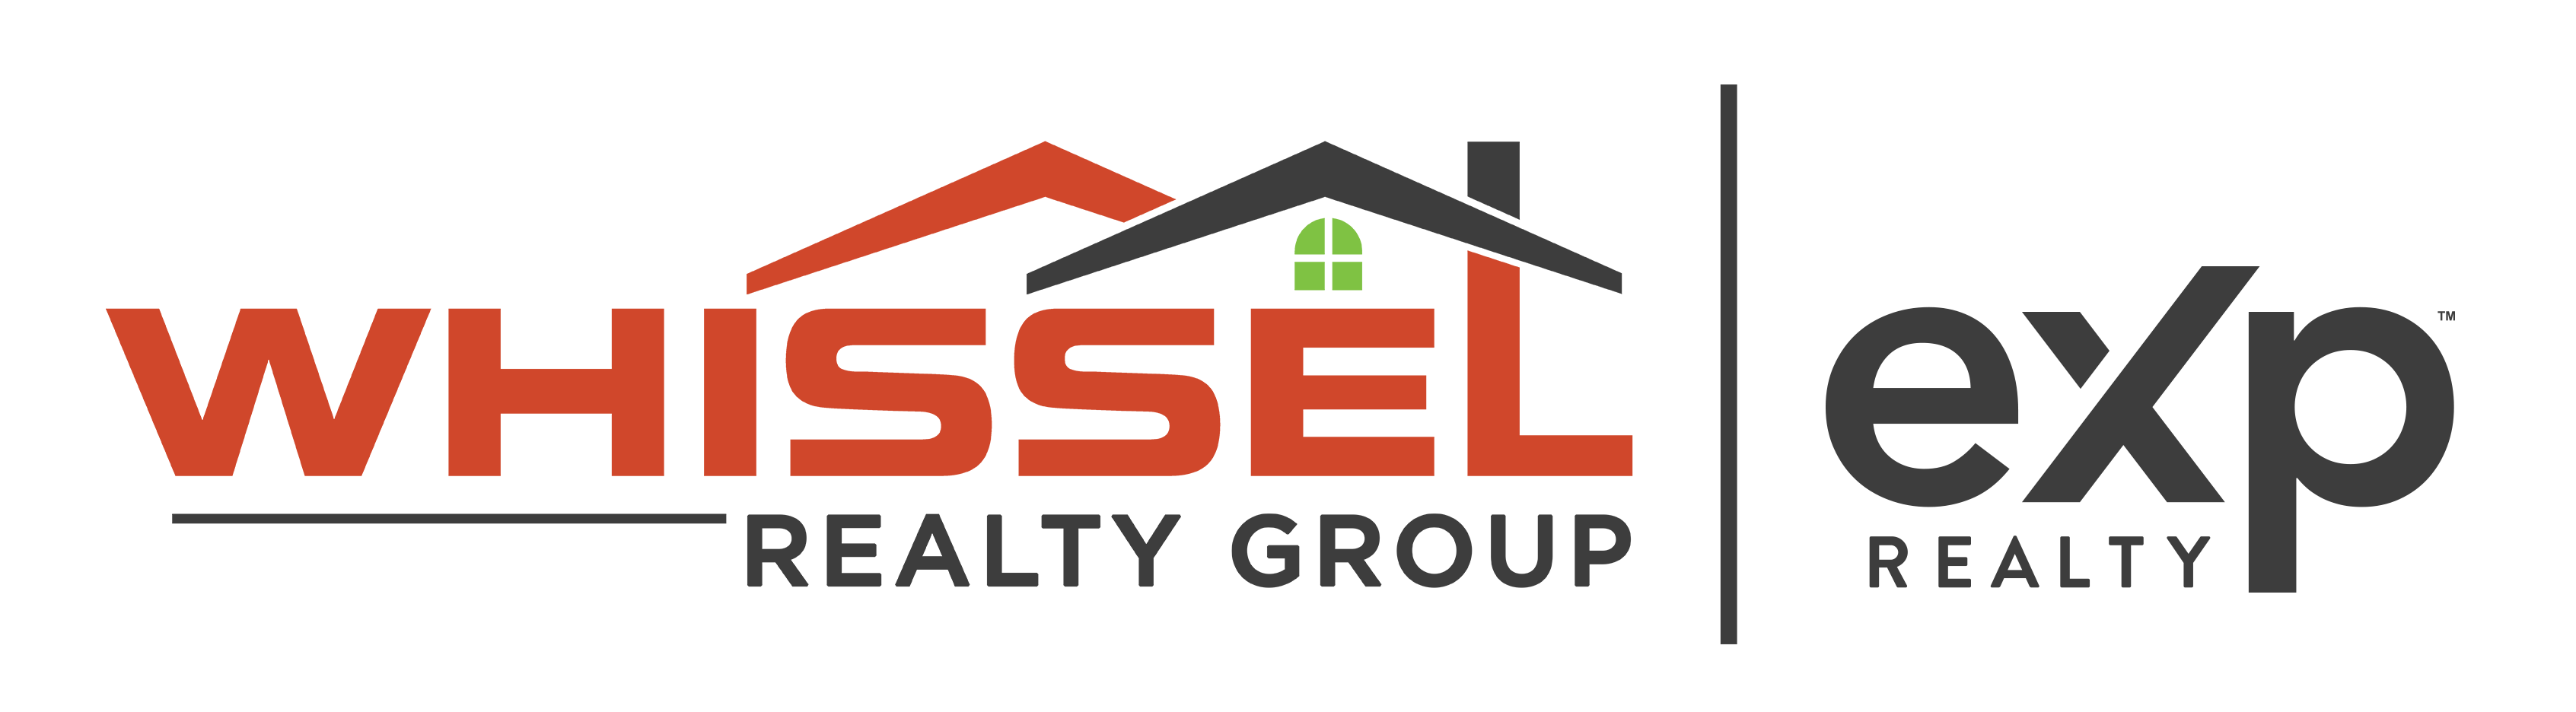 Whissel Realty - San Diego's #1 Ranked Real Estate Team